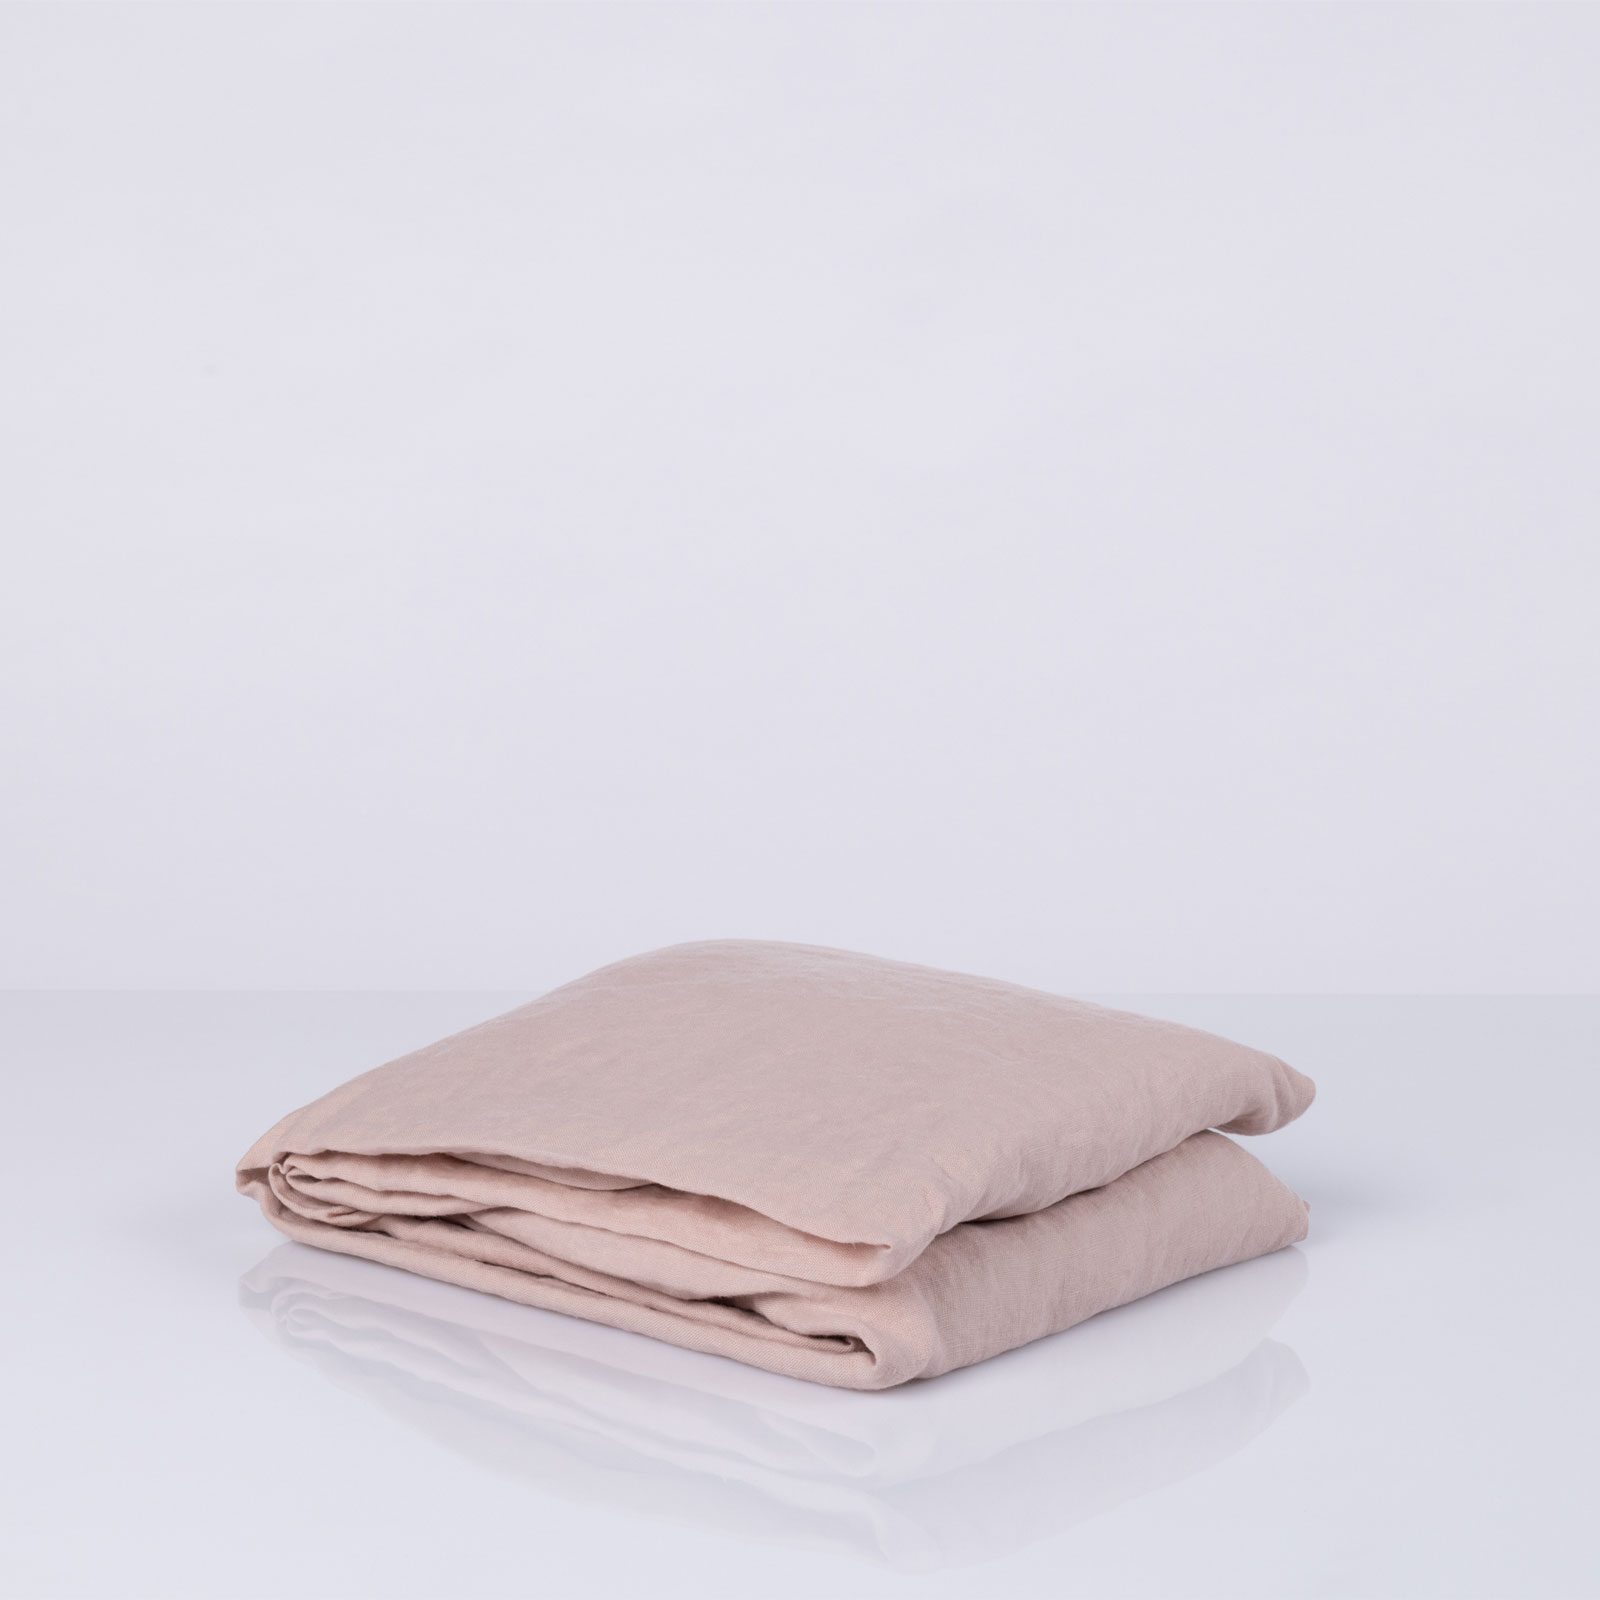 stone-washed-linen-fitted-sheet-powder-pink-1